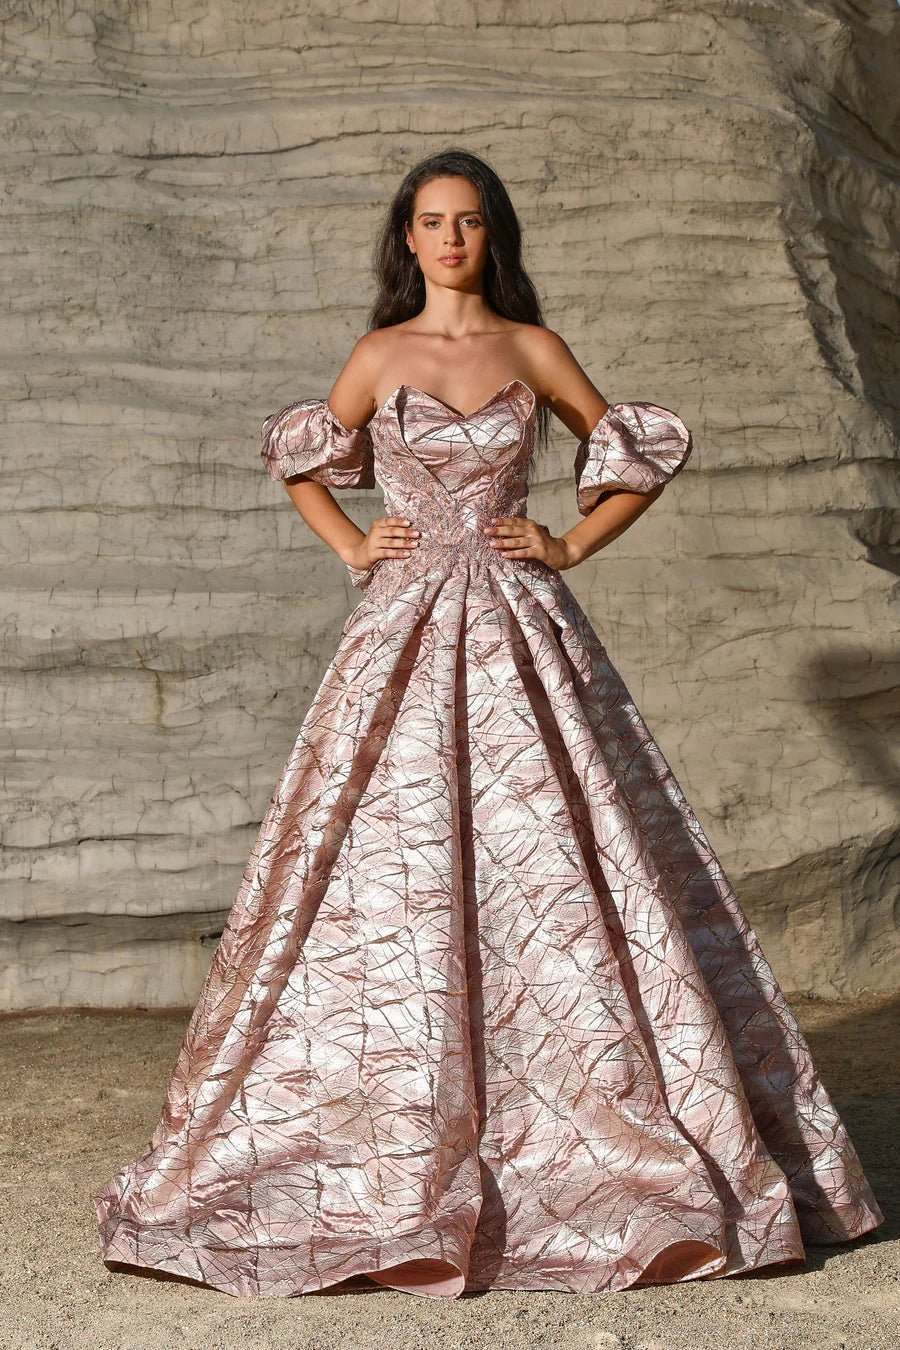 Luxurious Pink Ball Gown with Off-Shoulder Puff Sleeves - Designer Evening Dress and Pretty Sequin Dress Plus Size - WonderlandByLilian